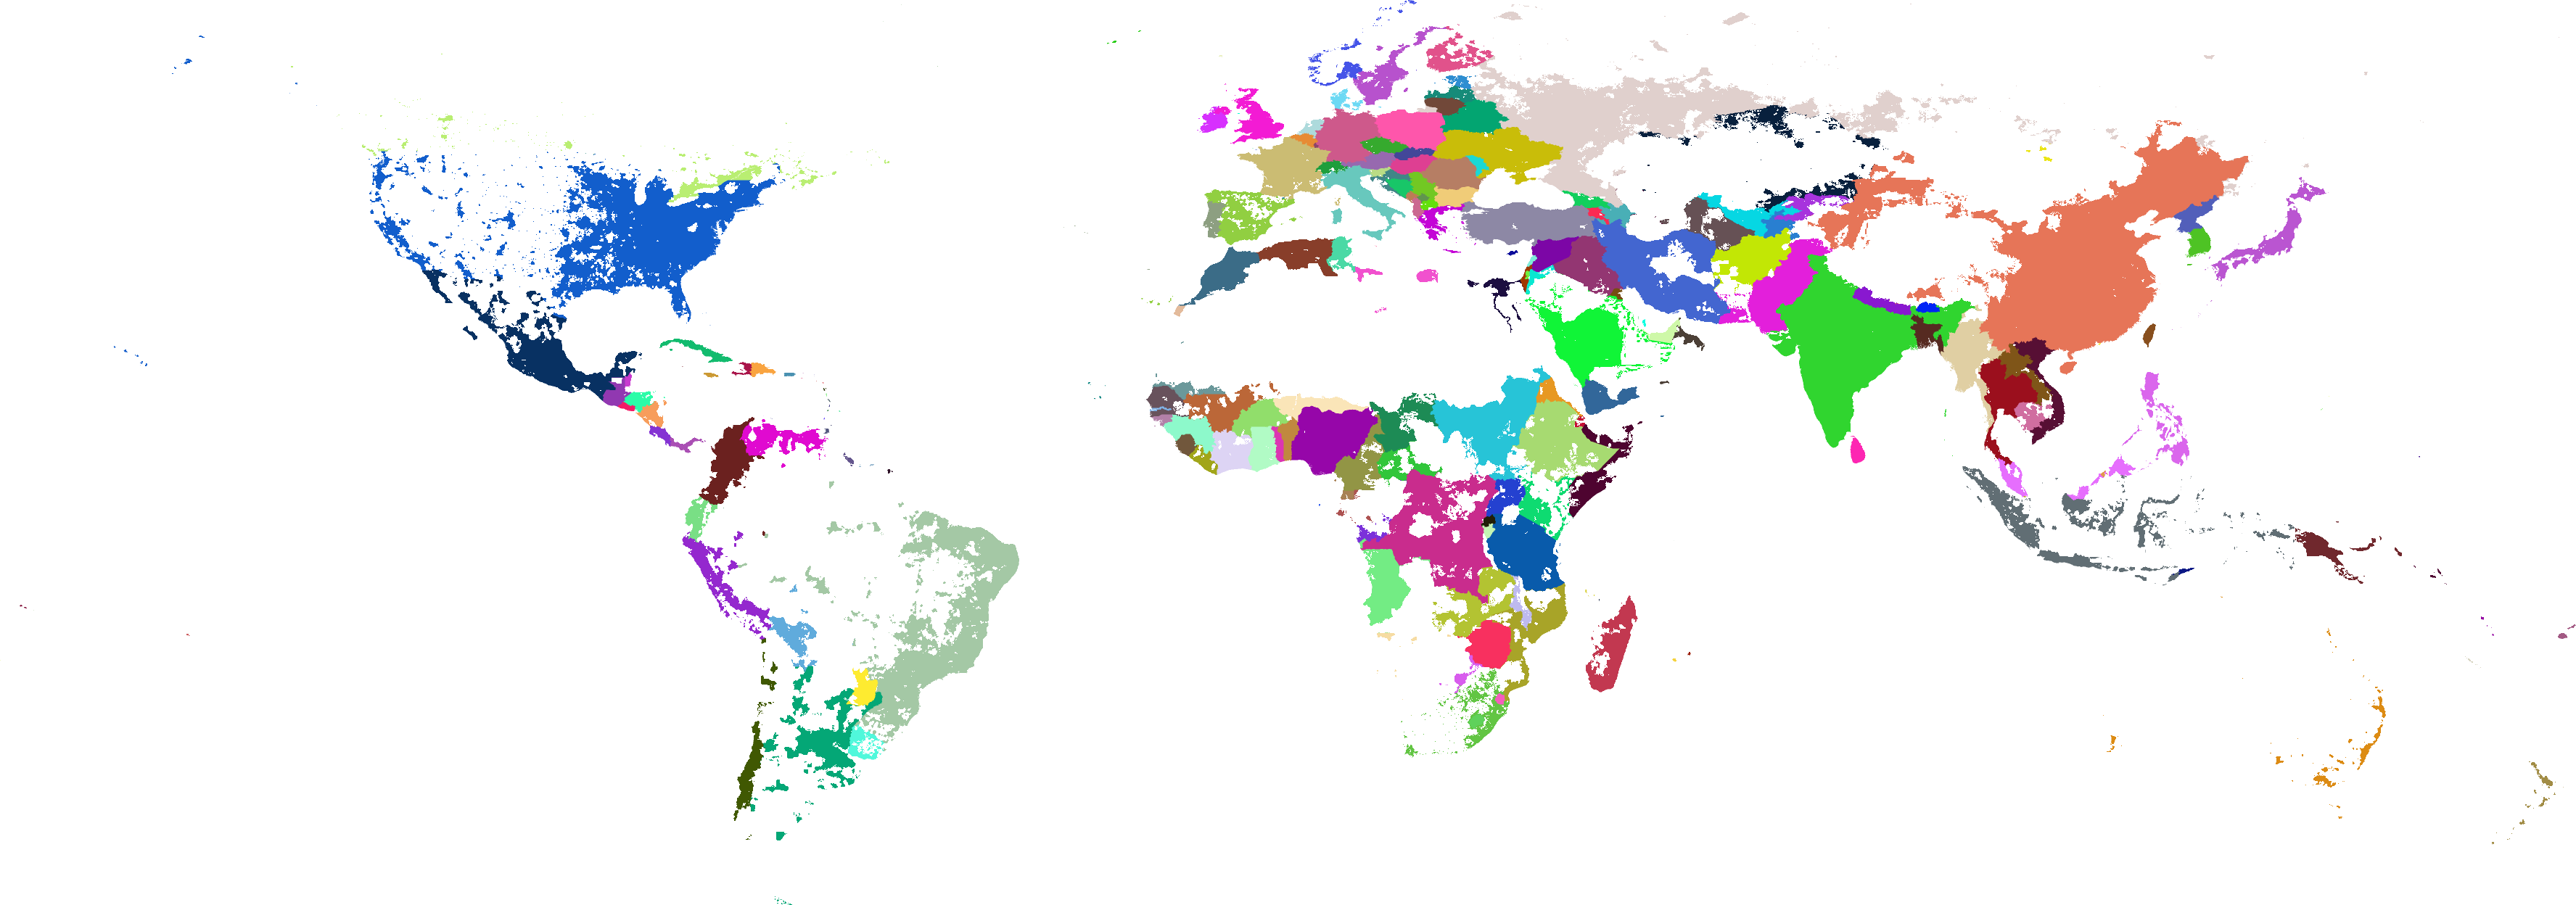 Map of the world show areas of with more than 5 people/km²